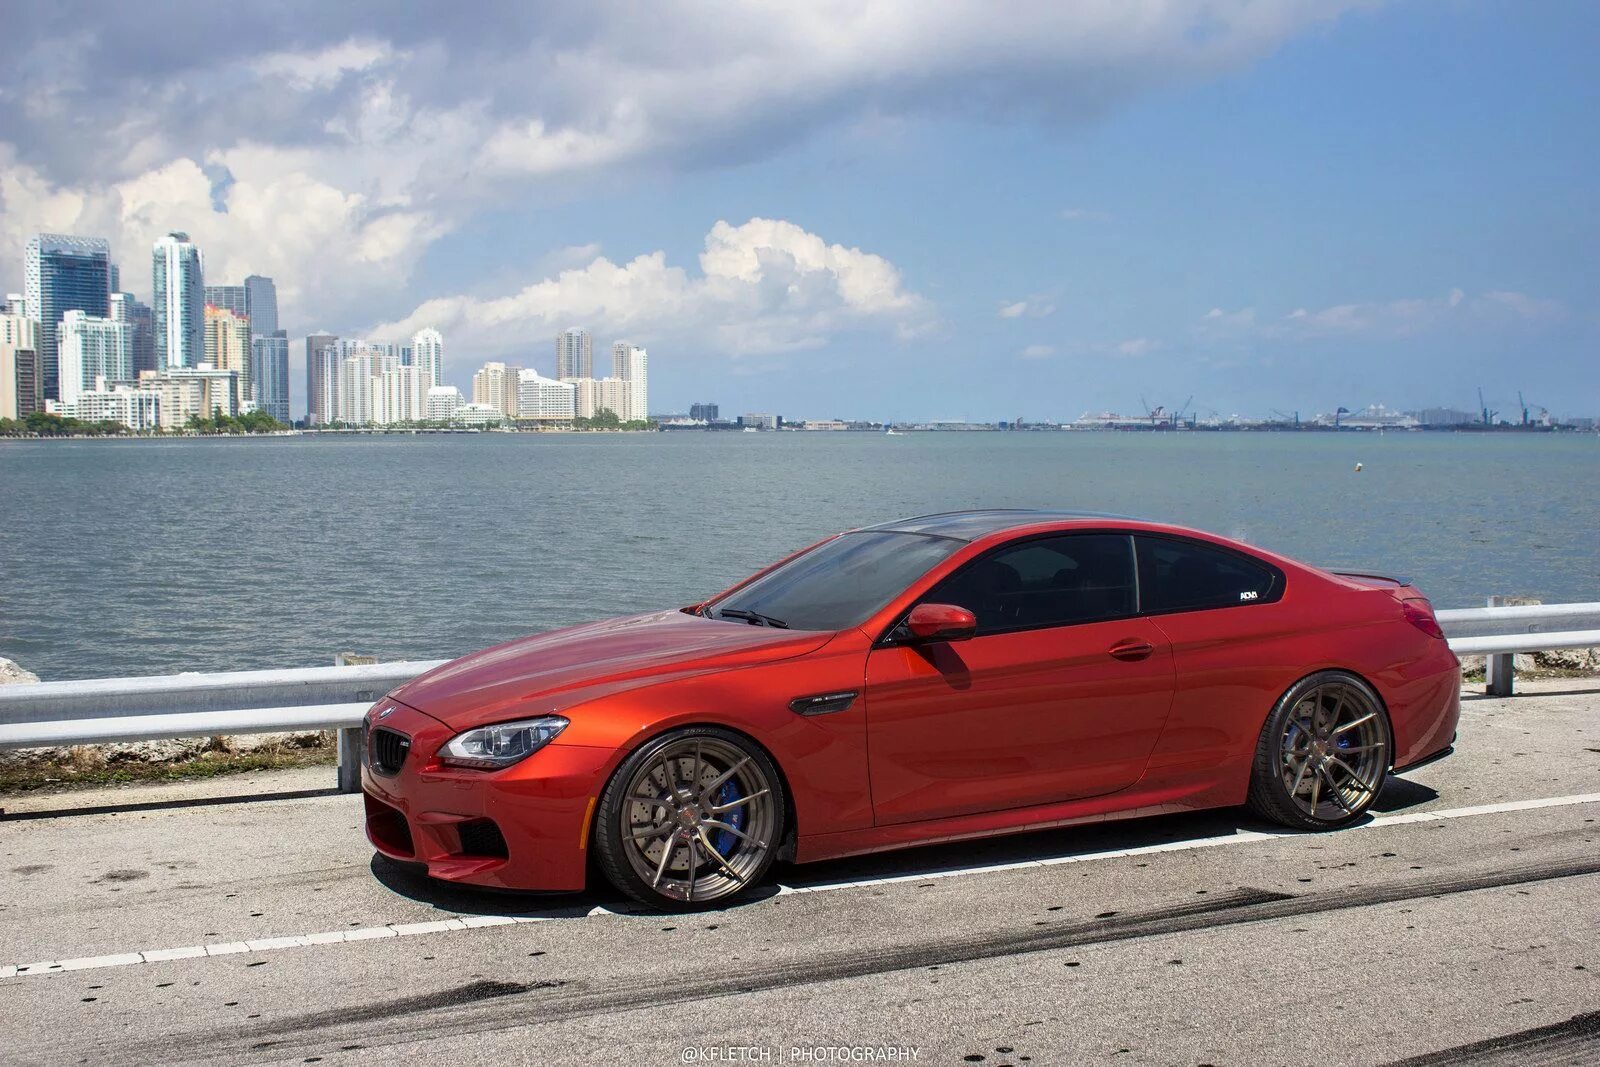 BMW m6 f13. BMW m6 Sakhir Orange. BMW m6 f13 Red. BMW m6 f12 Coupe.